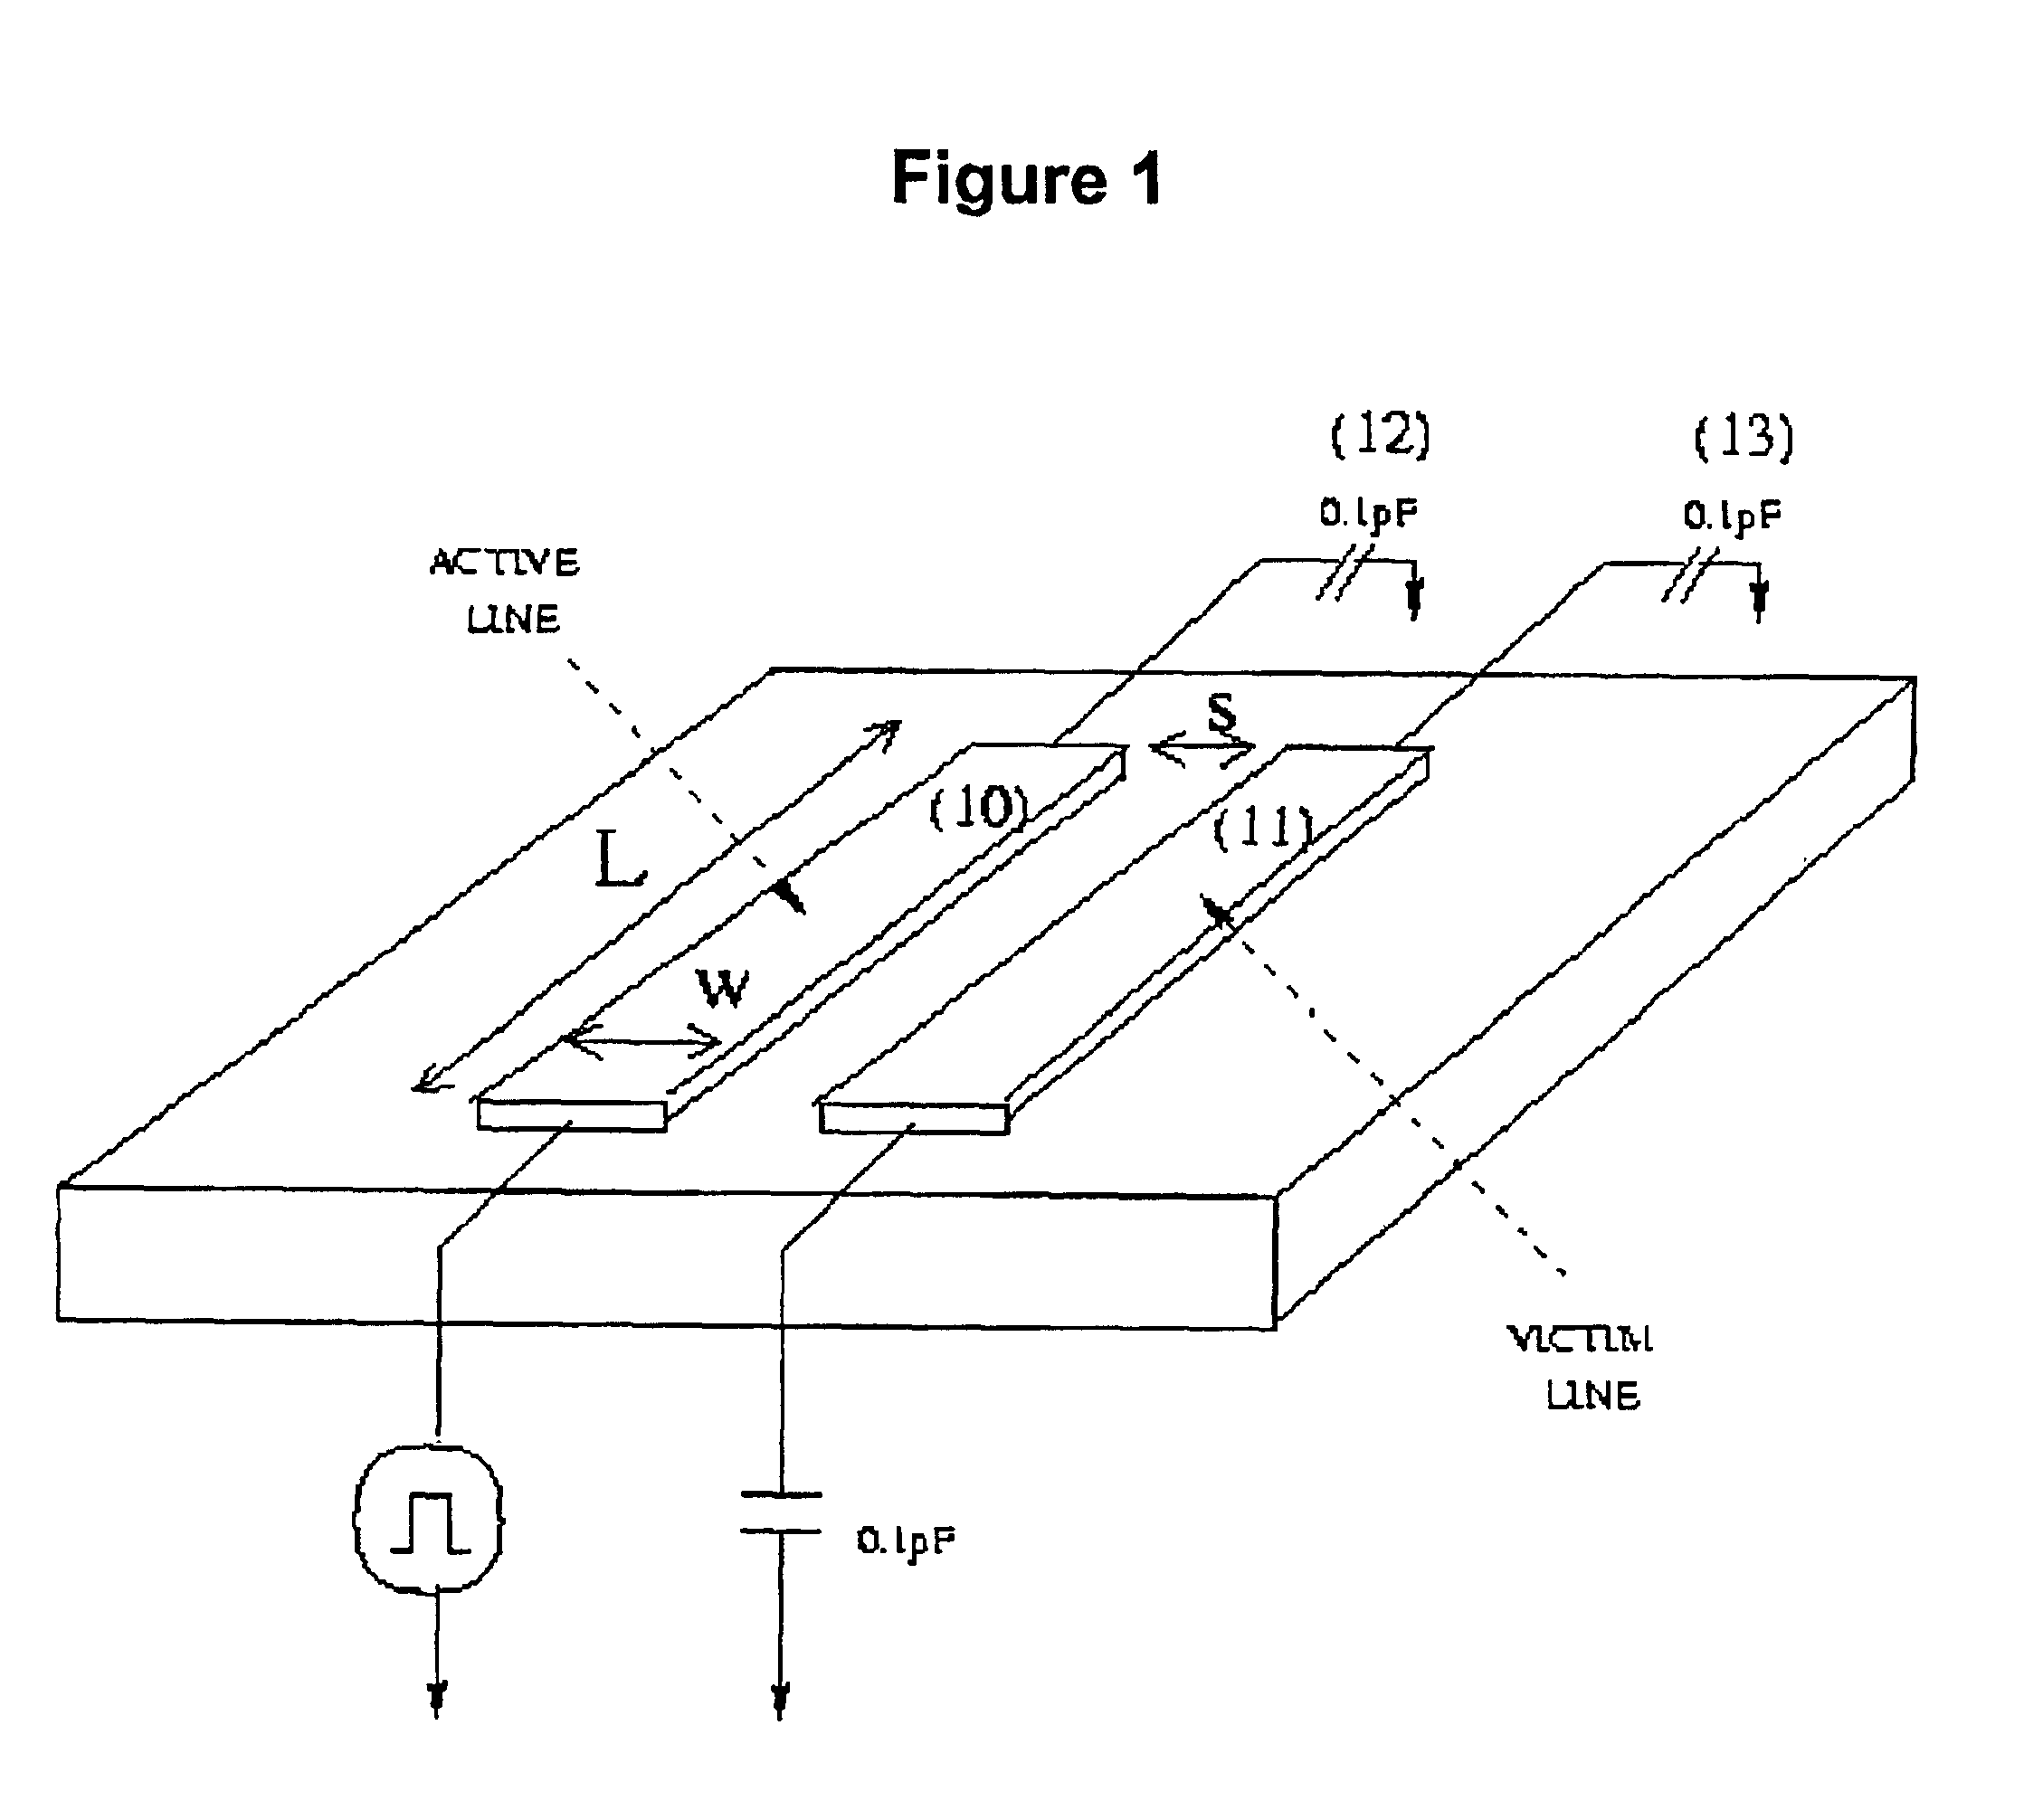 Method and apparatus for online detection and correction of faults affecting system-on-chip buses